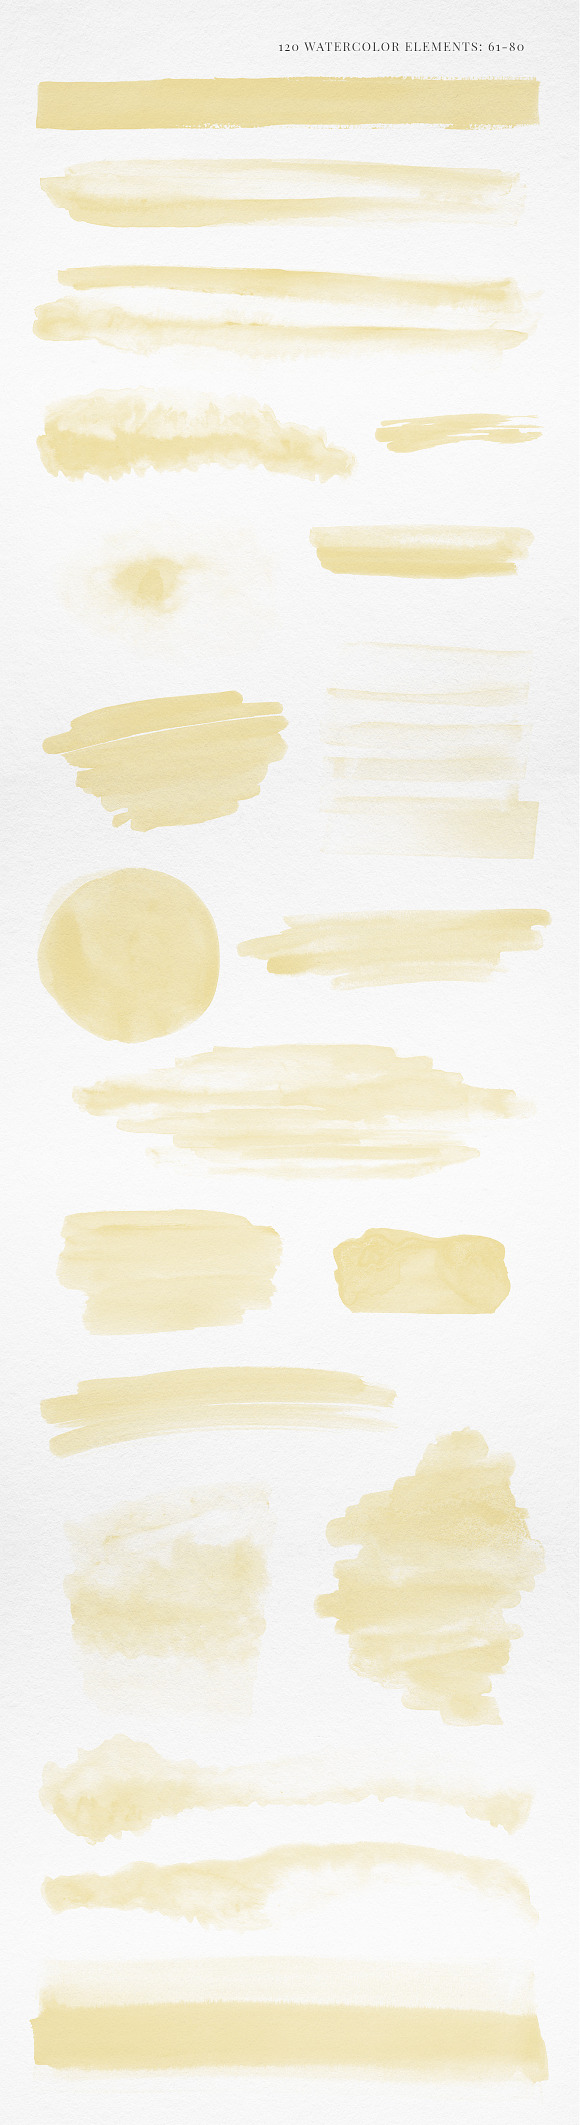 120 Watercolor Elements Yellow Gold in Textures - product preview 4